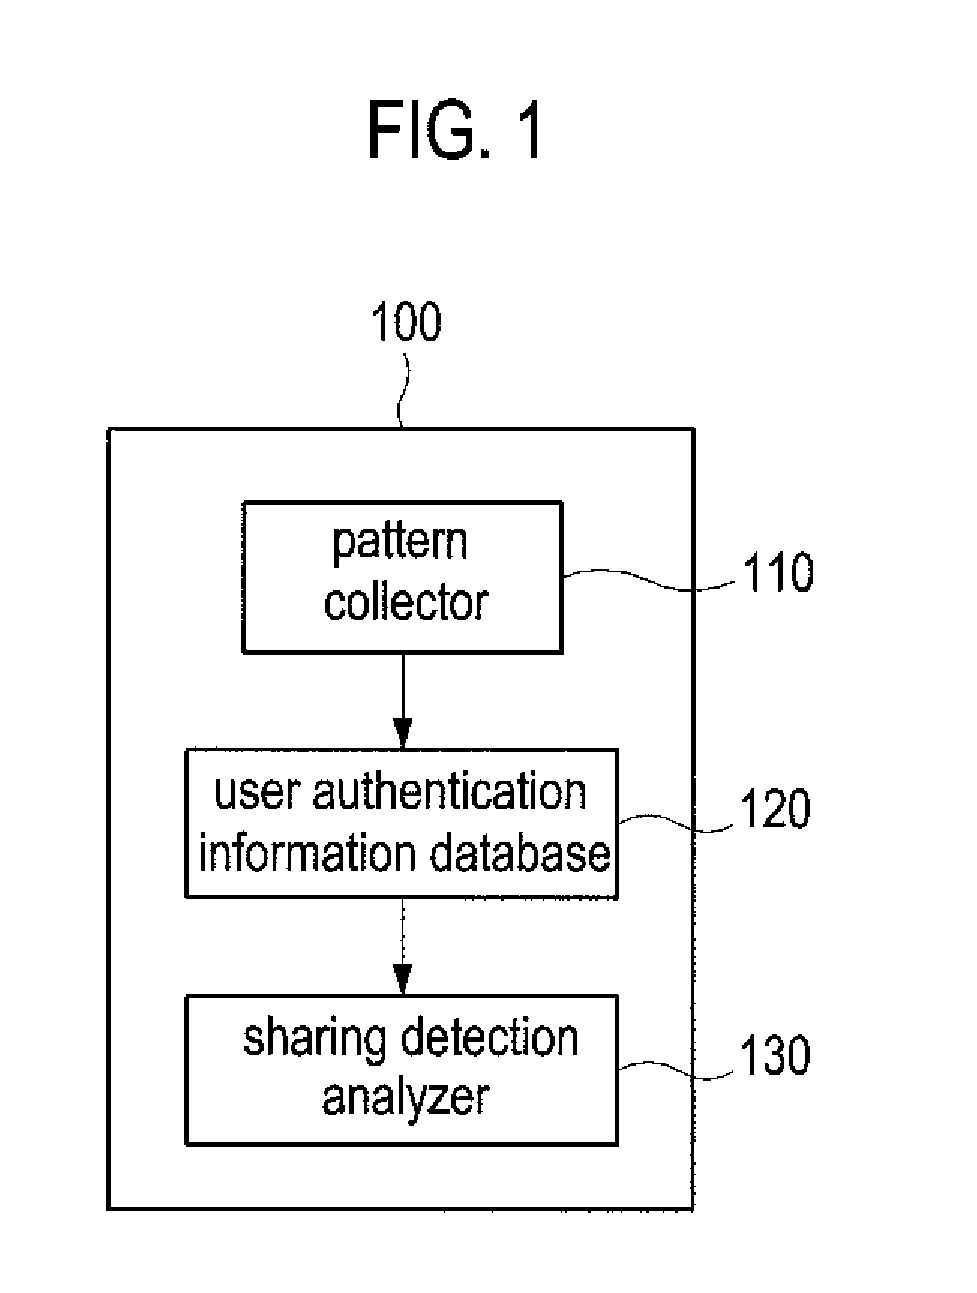 Method and system of detecting account sharing based on behavior patterns